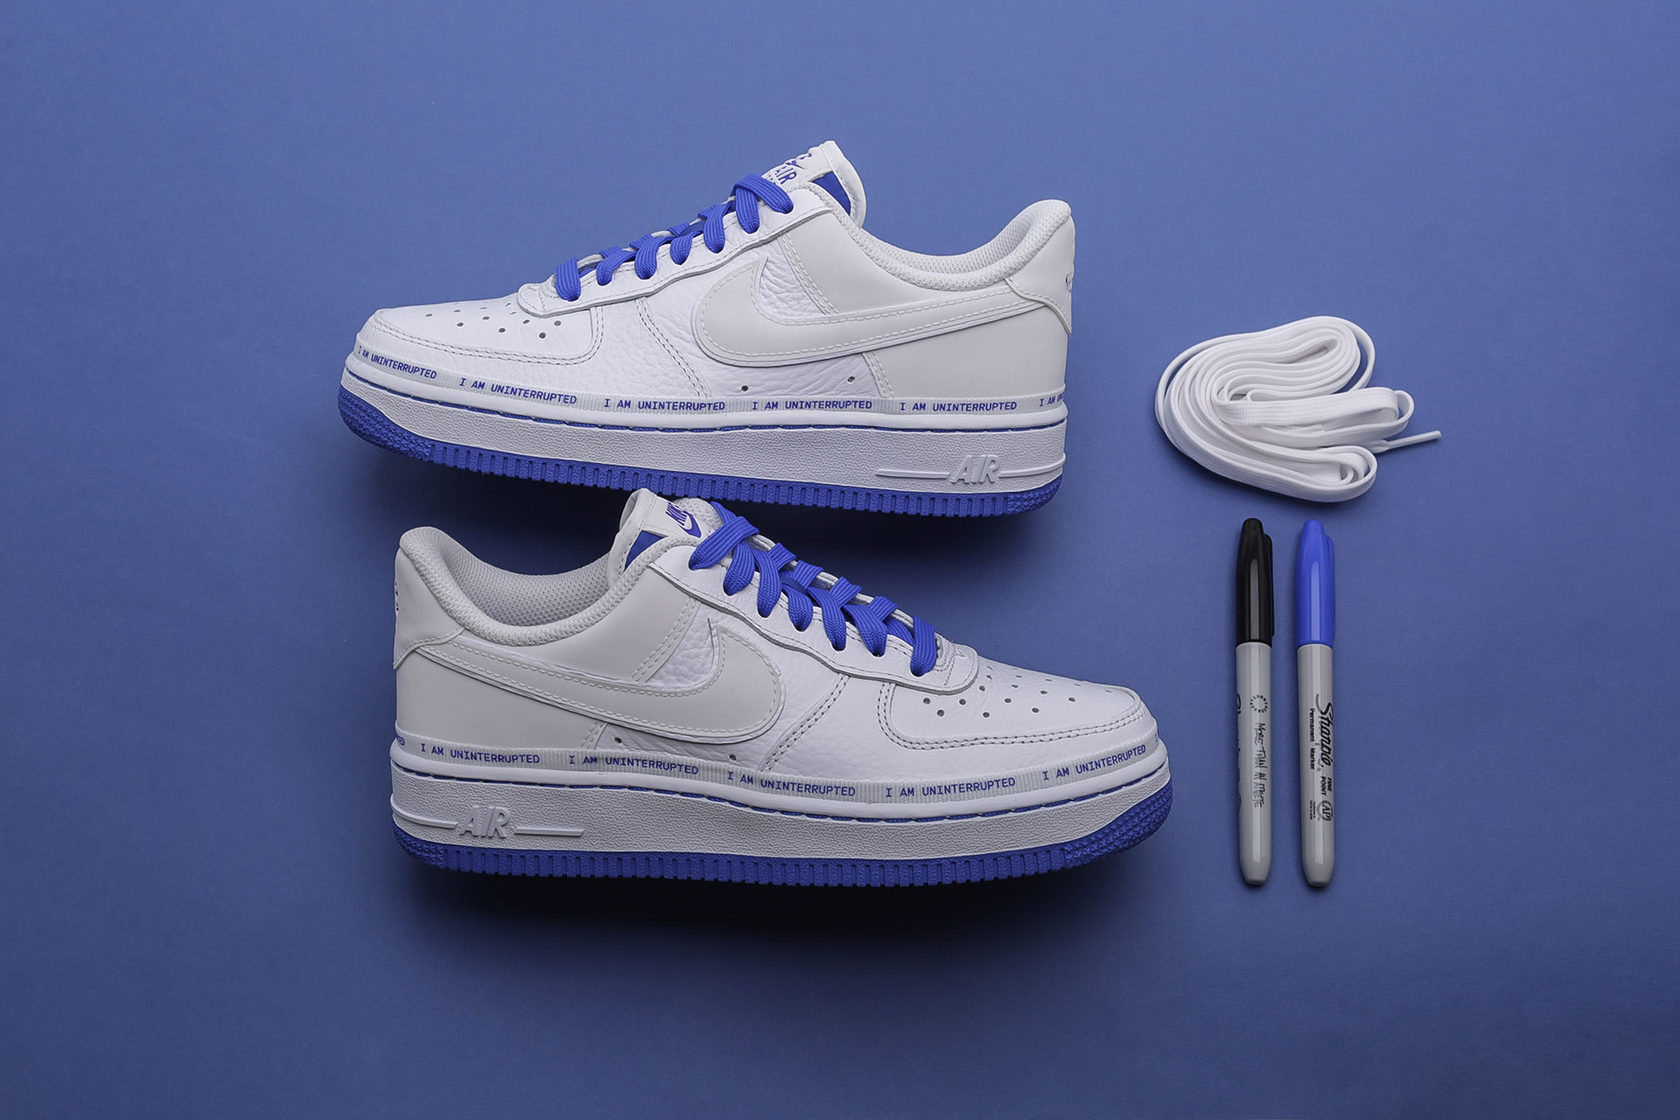 uninterrupted nike air force 1